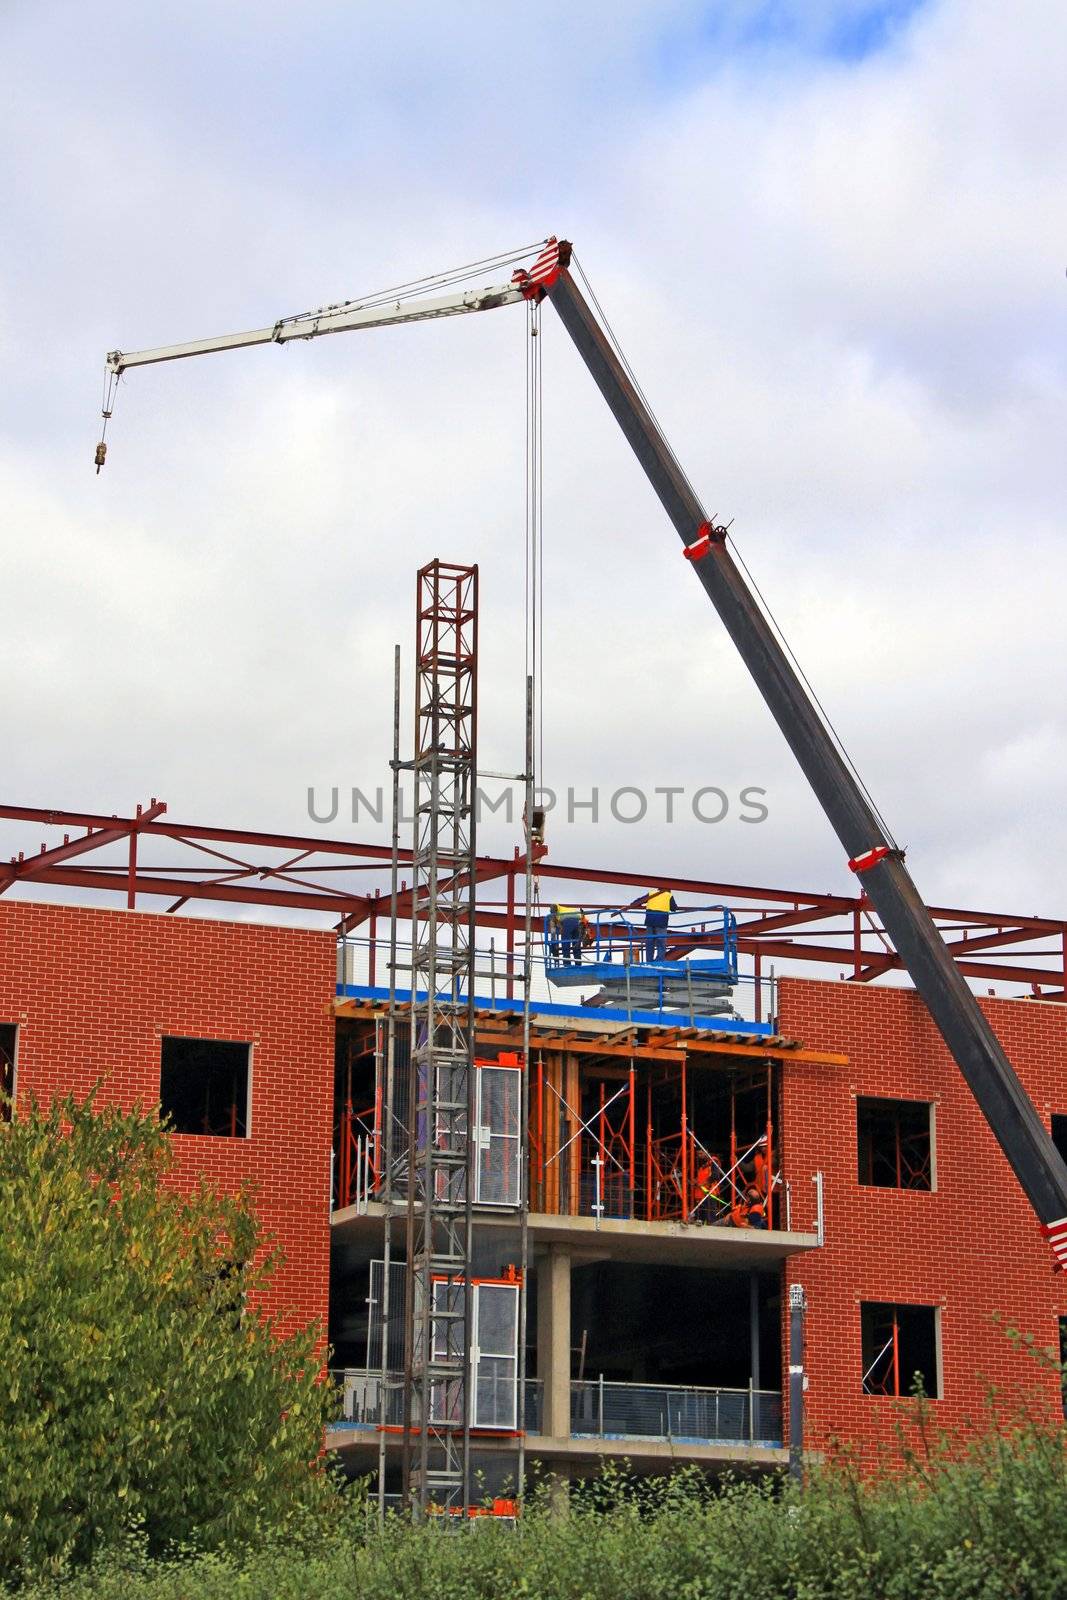 Construction site for Red Brick Office Building by Cloudia